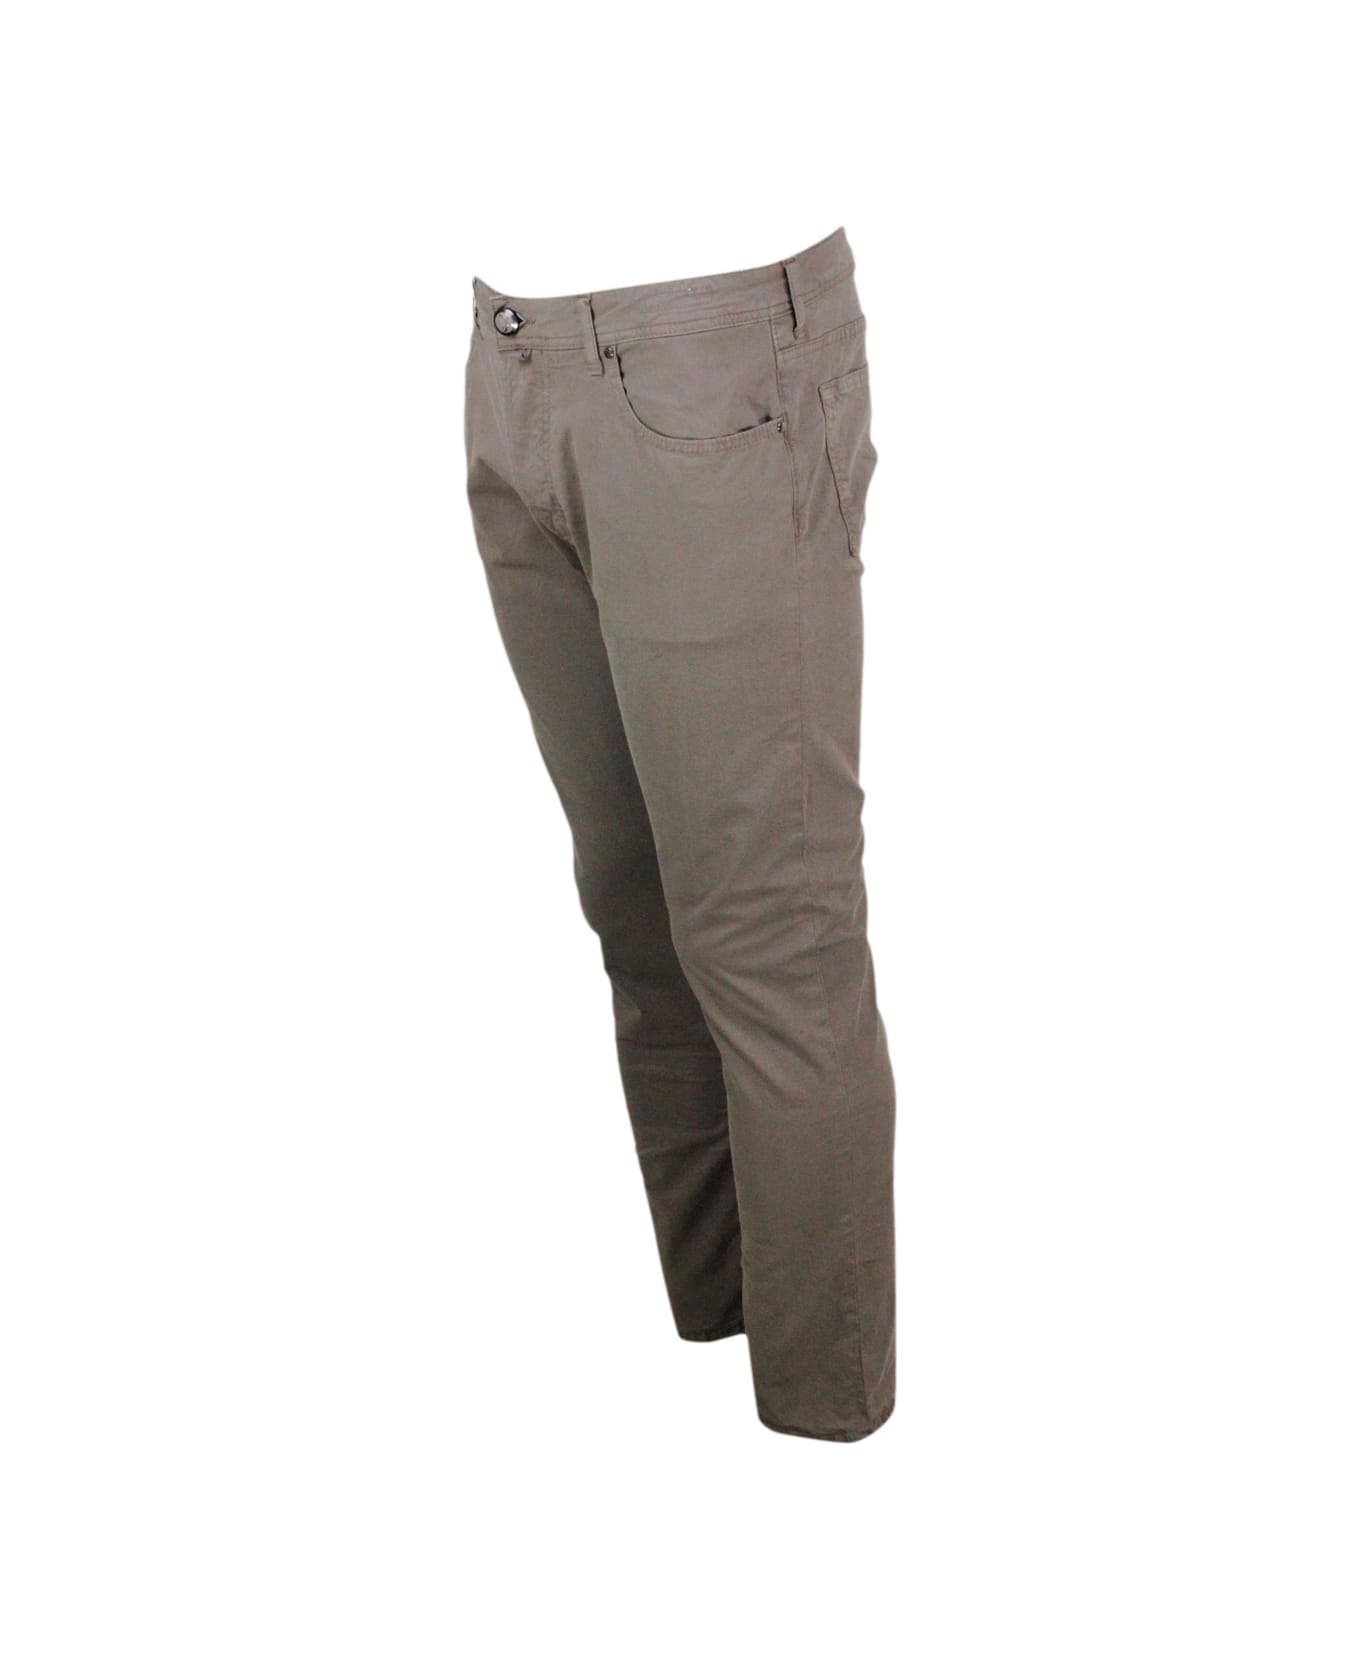 Jacob Cohen Bard J688 Luxury Edition Trousers In Soft Stretch Cotton With 5 Pockets With Closure Buttons And Lacquered Button And Pony Skin Tag With Logo - Taupe